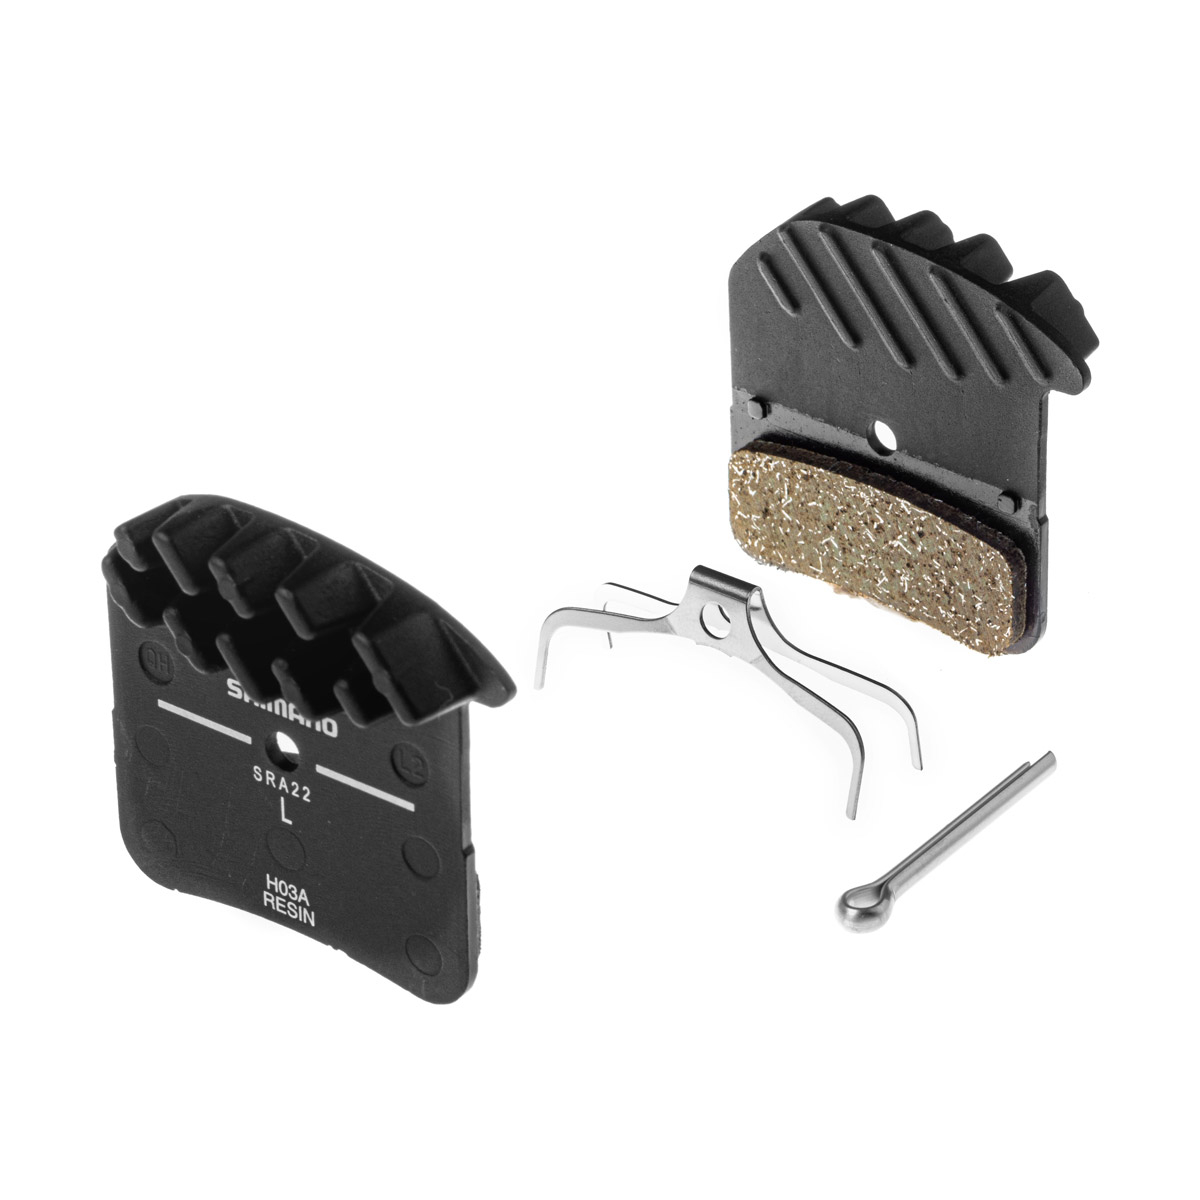 Shimano Resin S with Cooling Fins H03A Brake Pads